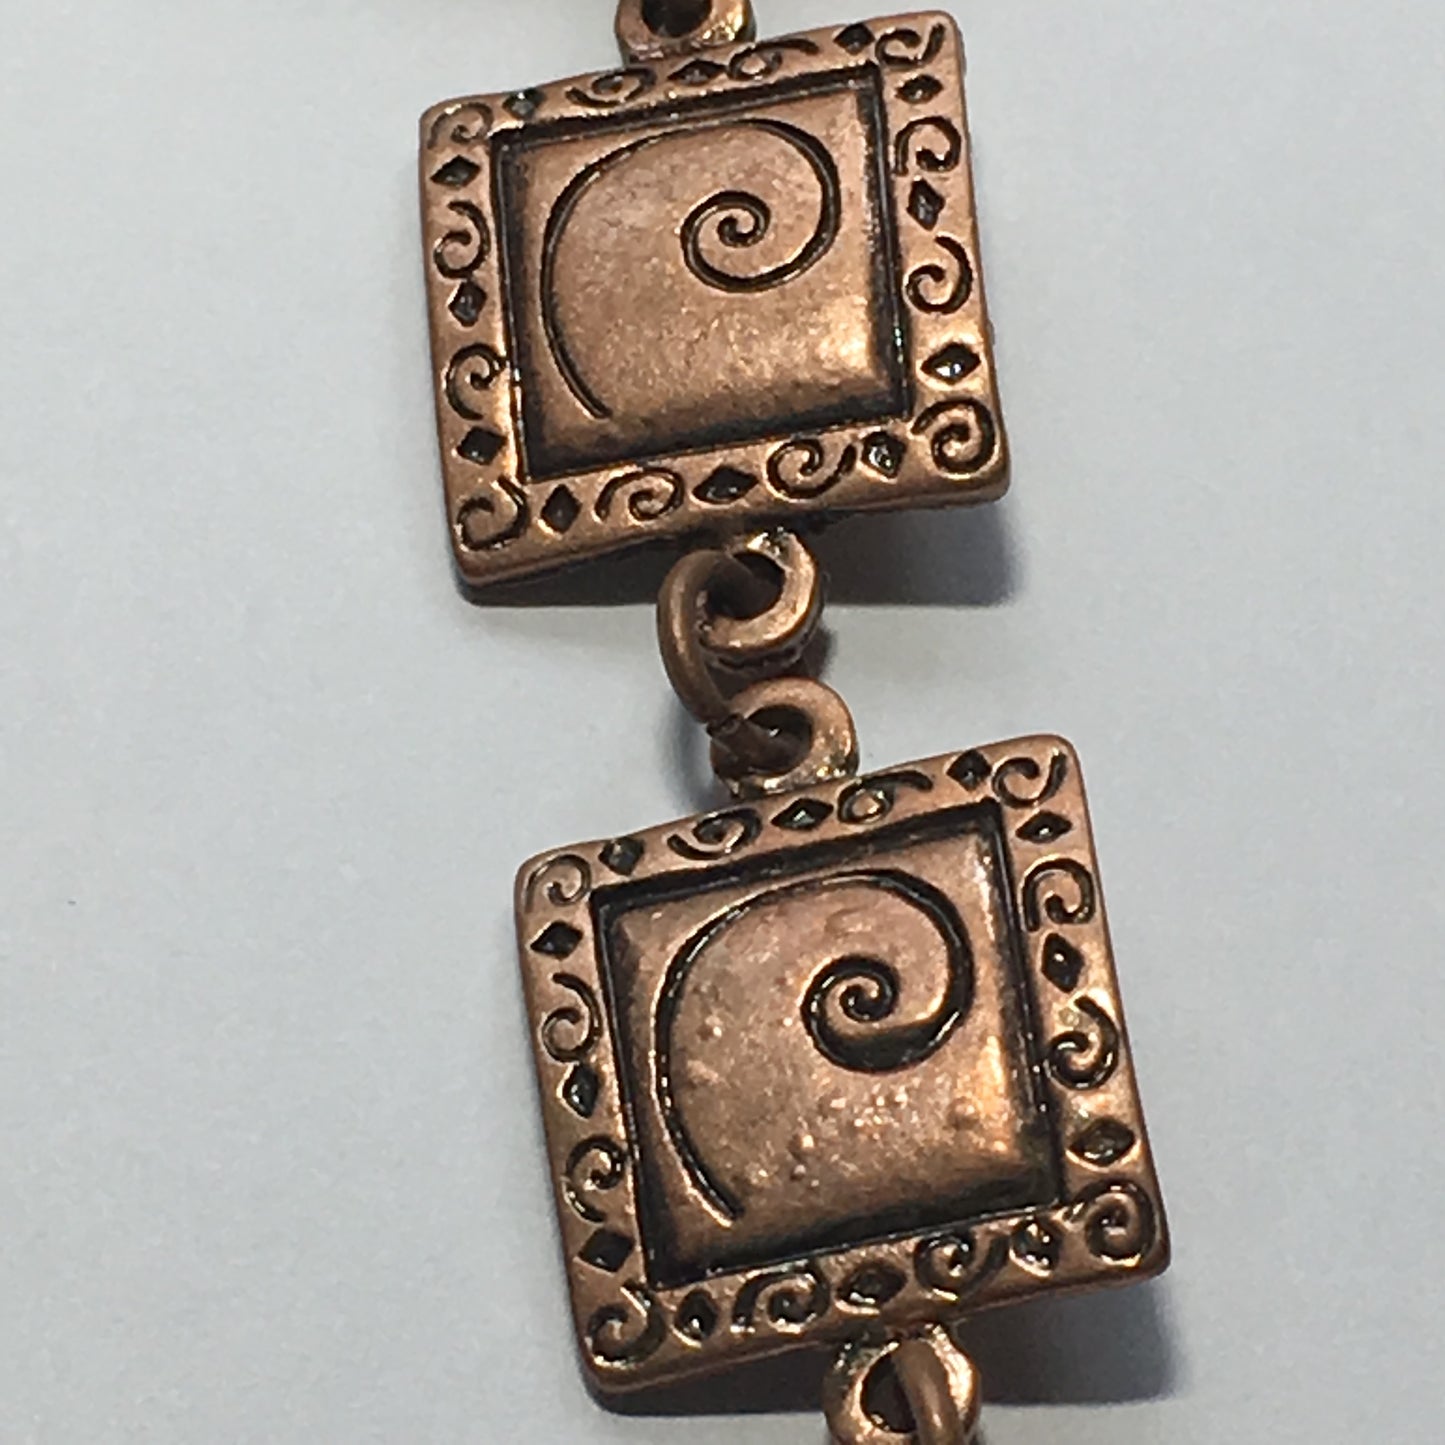 Beyond Beautiful Antique Silver, Antique Copper or Antique Gold Square Swirl Spacer Link , 15 mm  - 7 Links